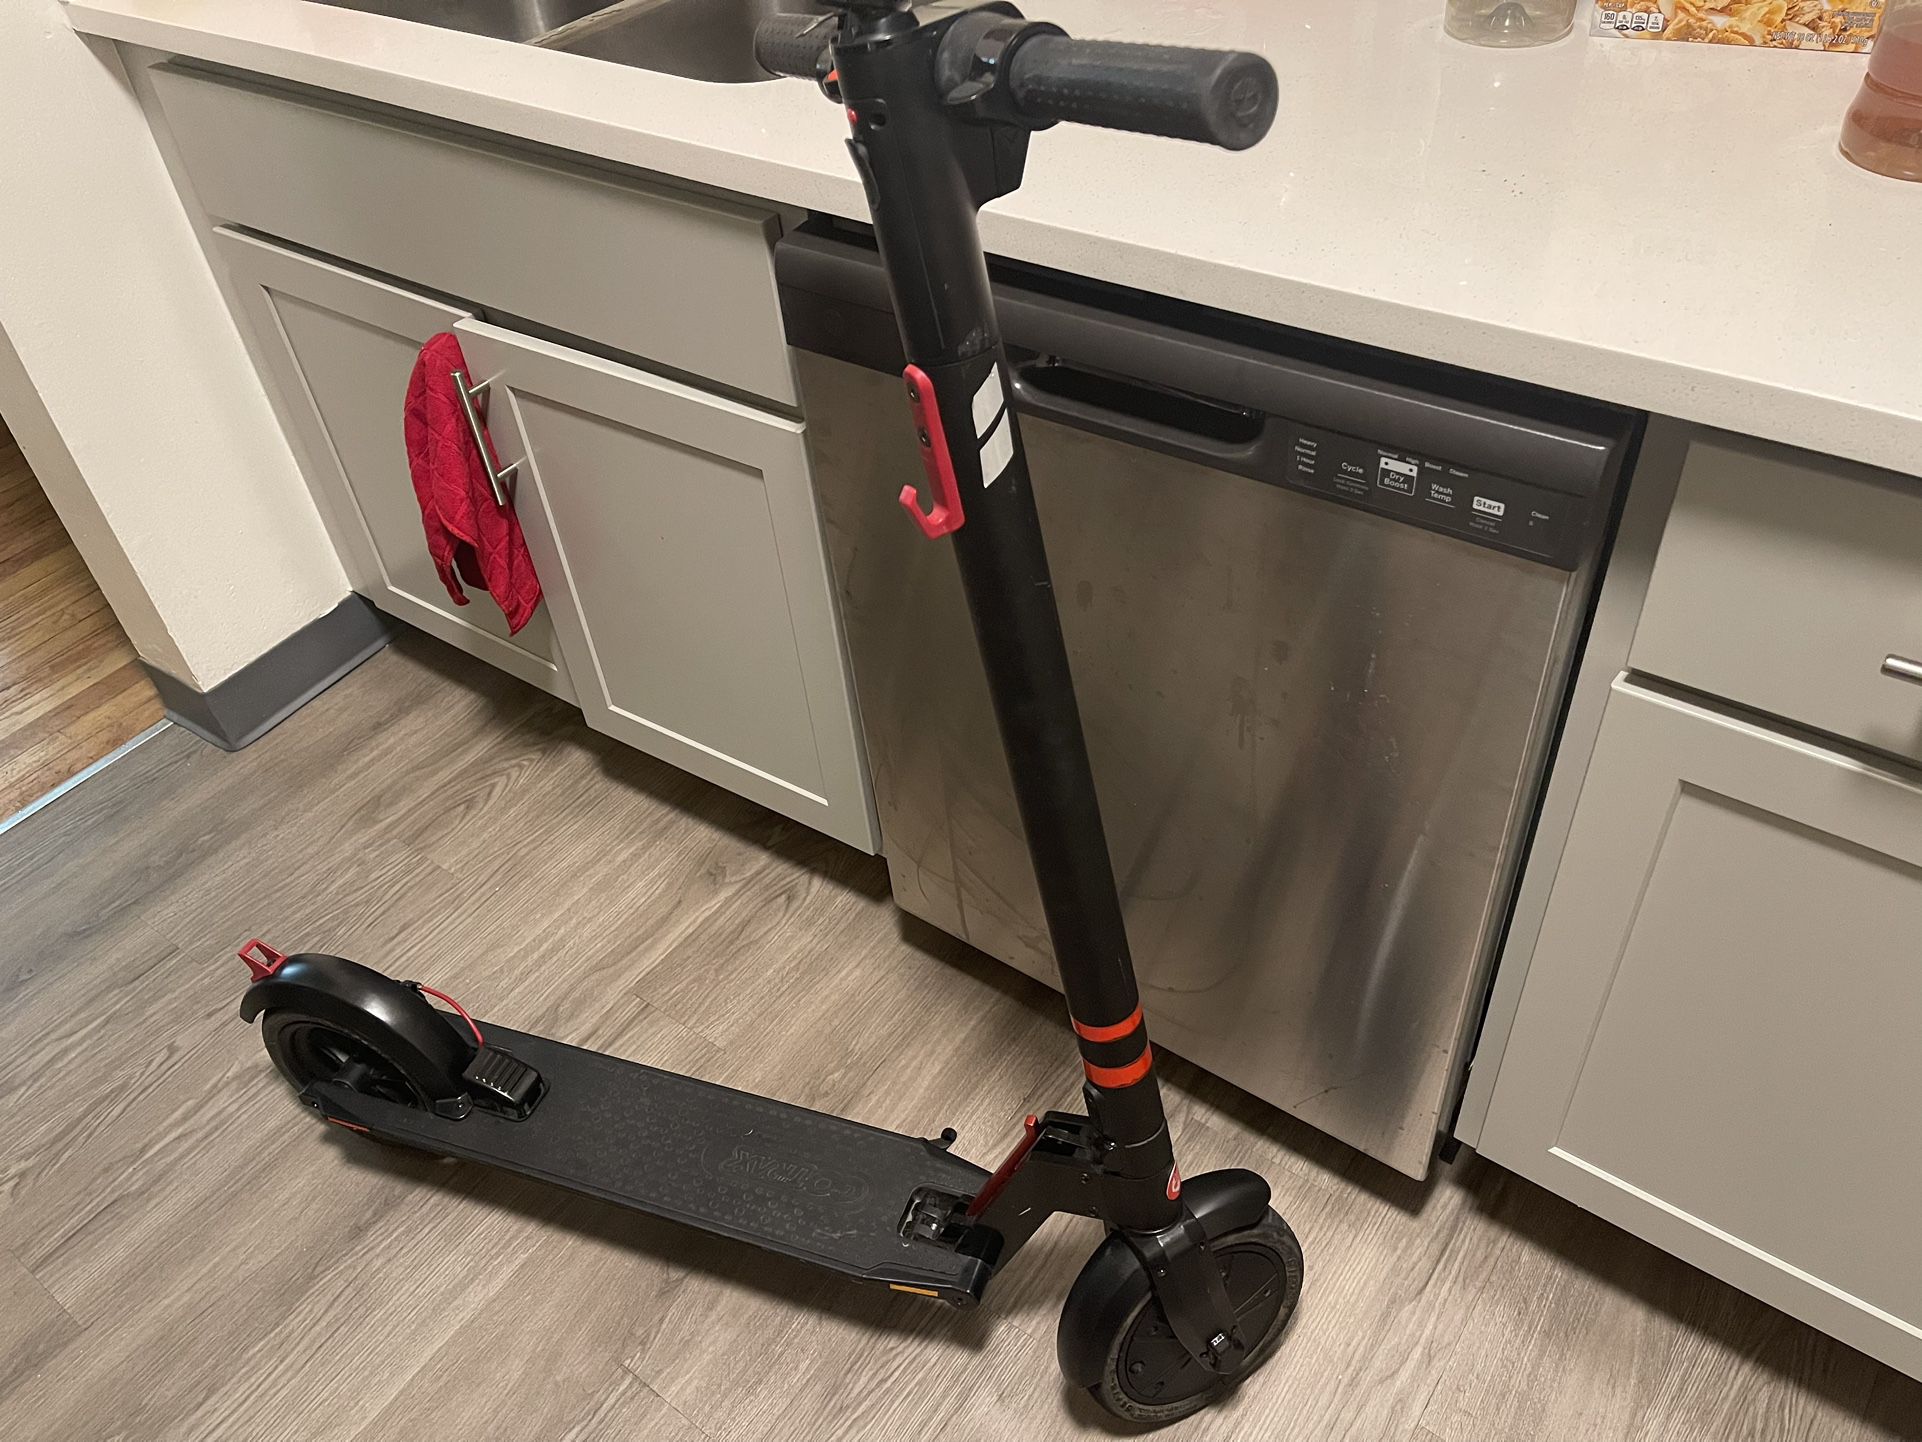 Gotrax GXL electric scooter